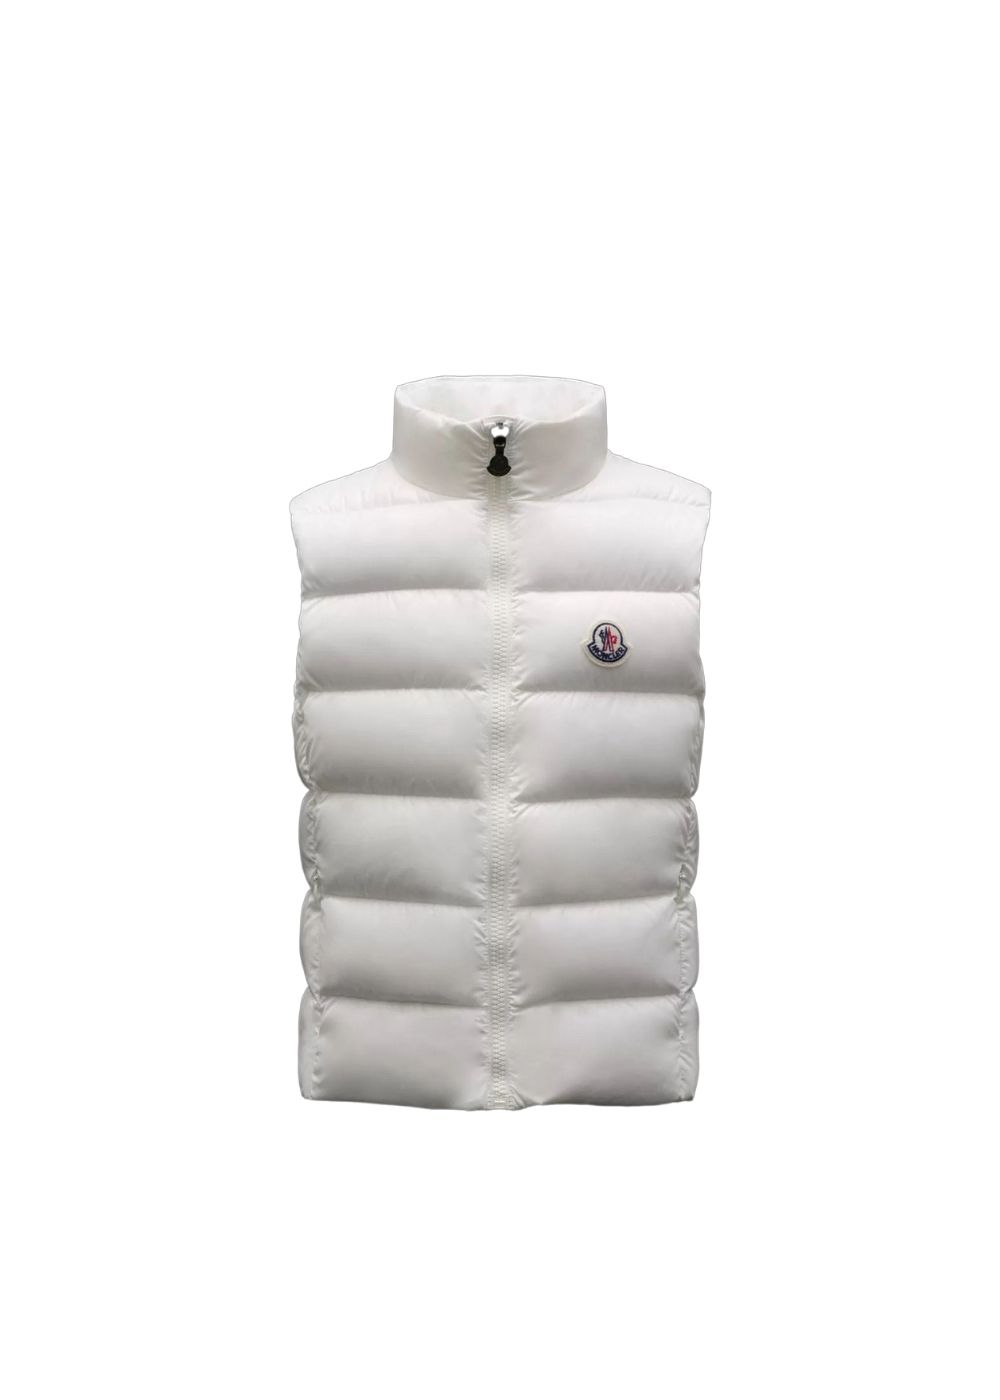 Featured image for “Moncler Ghany Bianco”